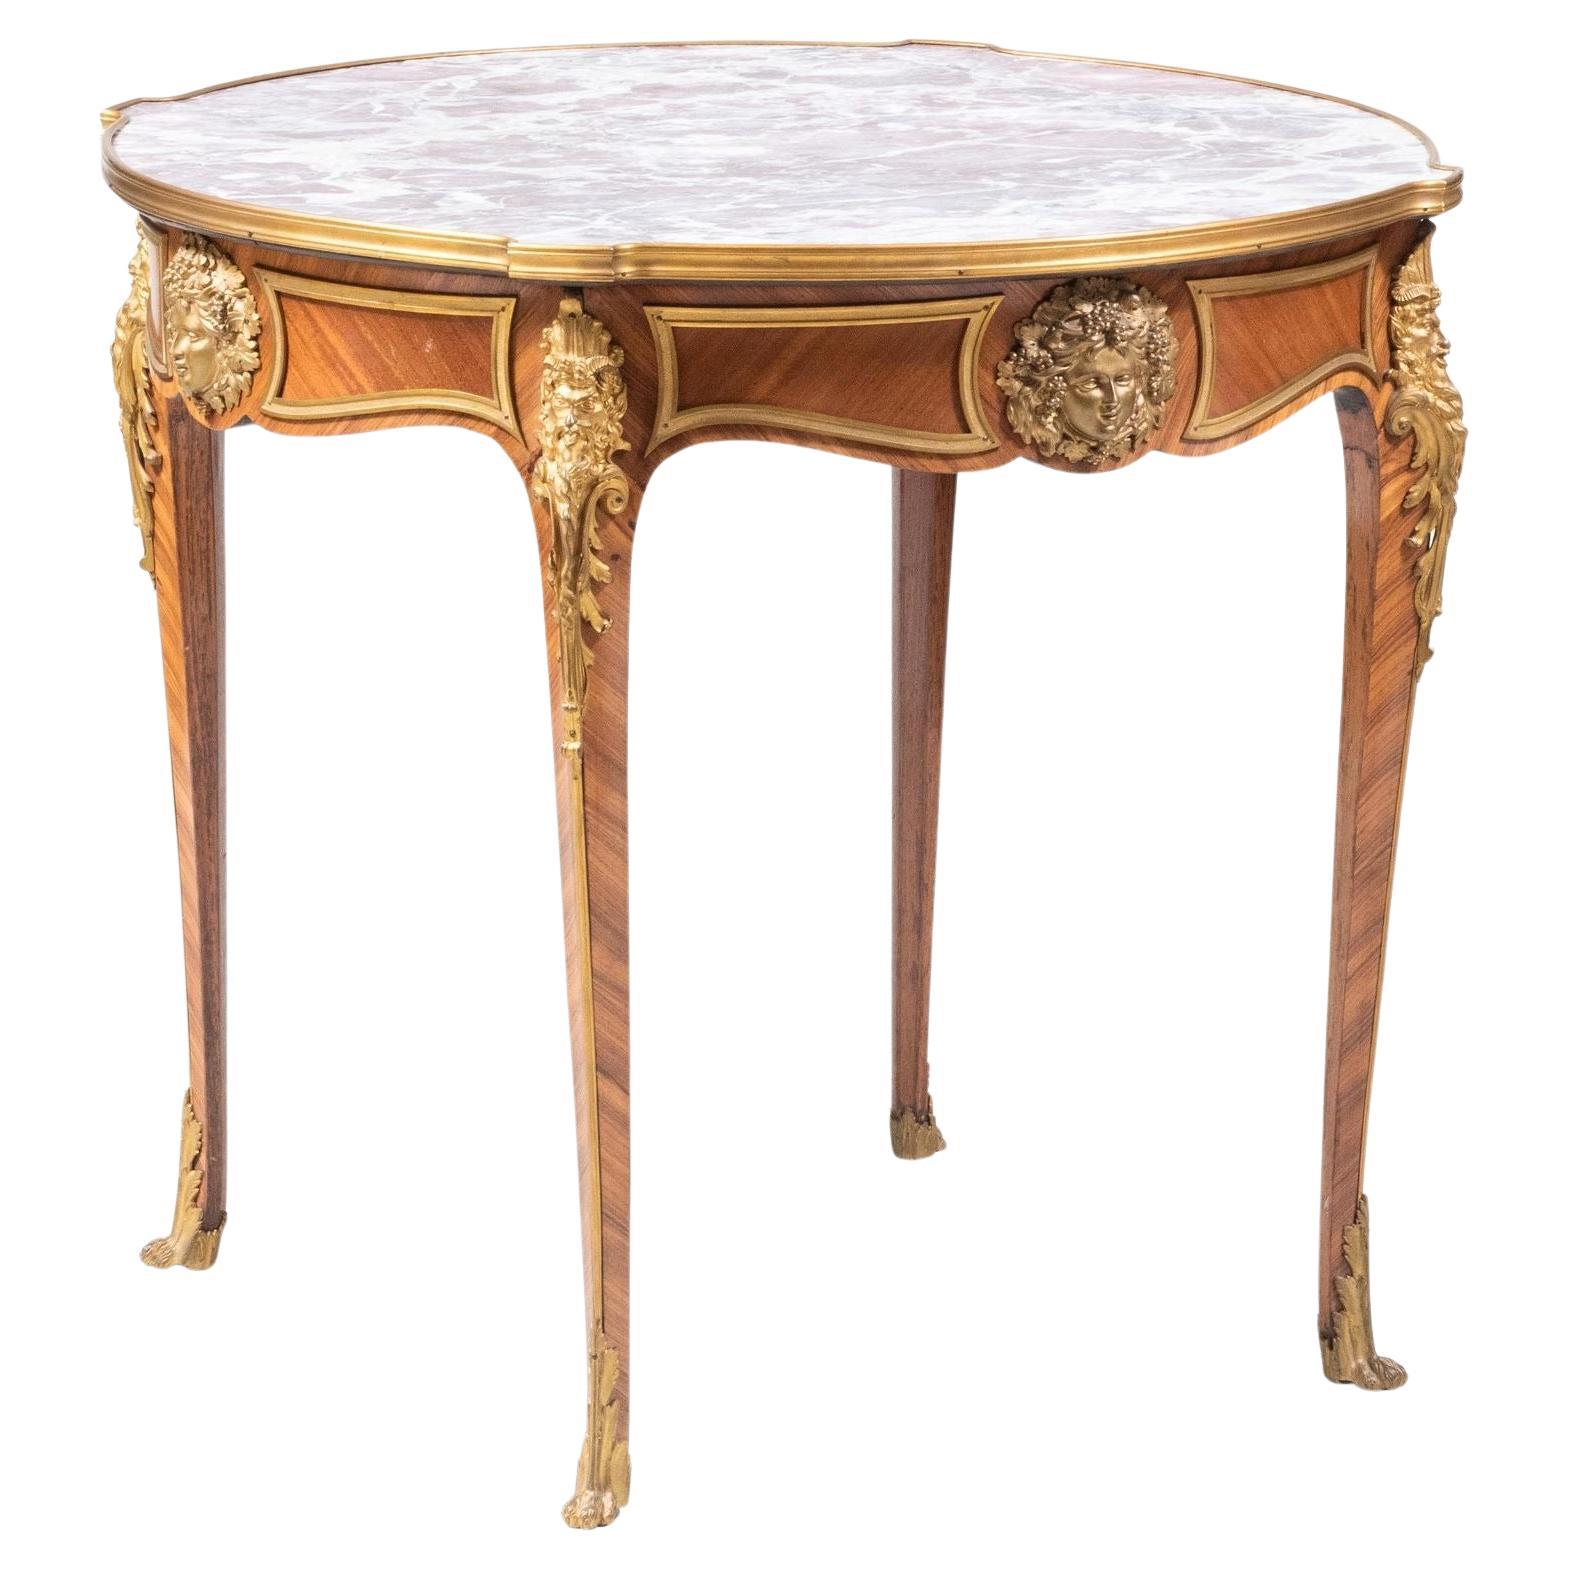 19th Century French Bronze Mounted Marble Top Center Table in Louis XV Style